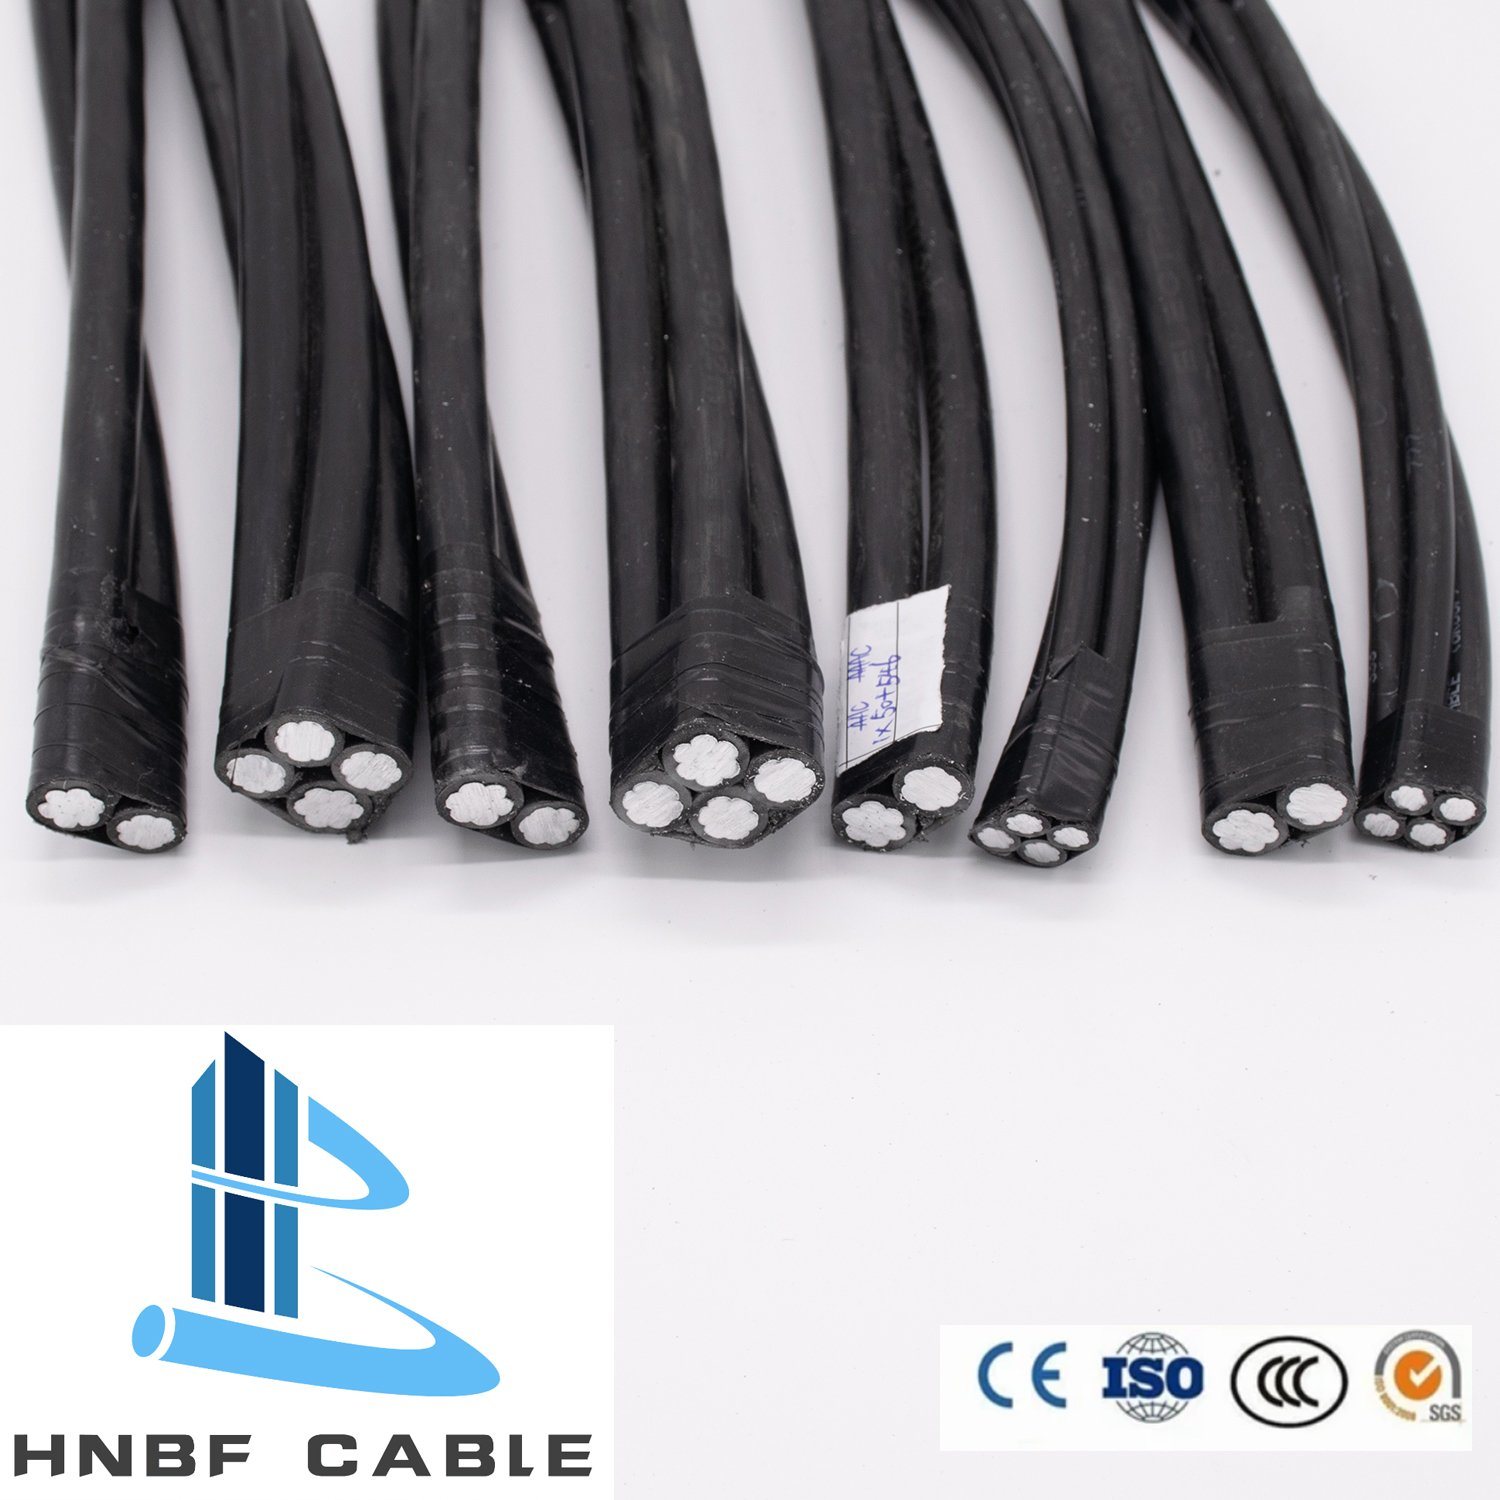 1X50+1X54, 6mm2 600/1000V ABC One Phase Aluminum Conductor LV Aerial Bundled Cable